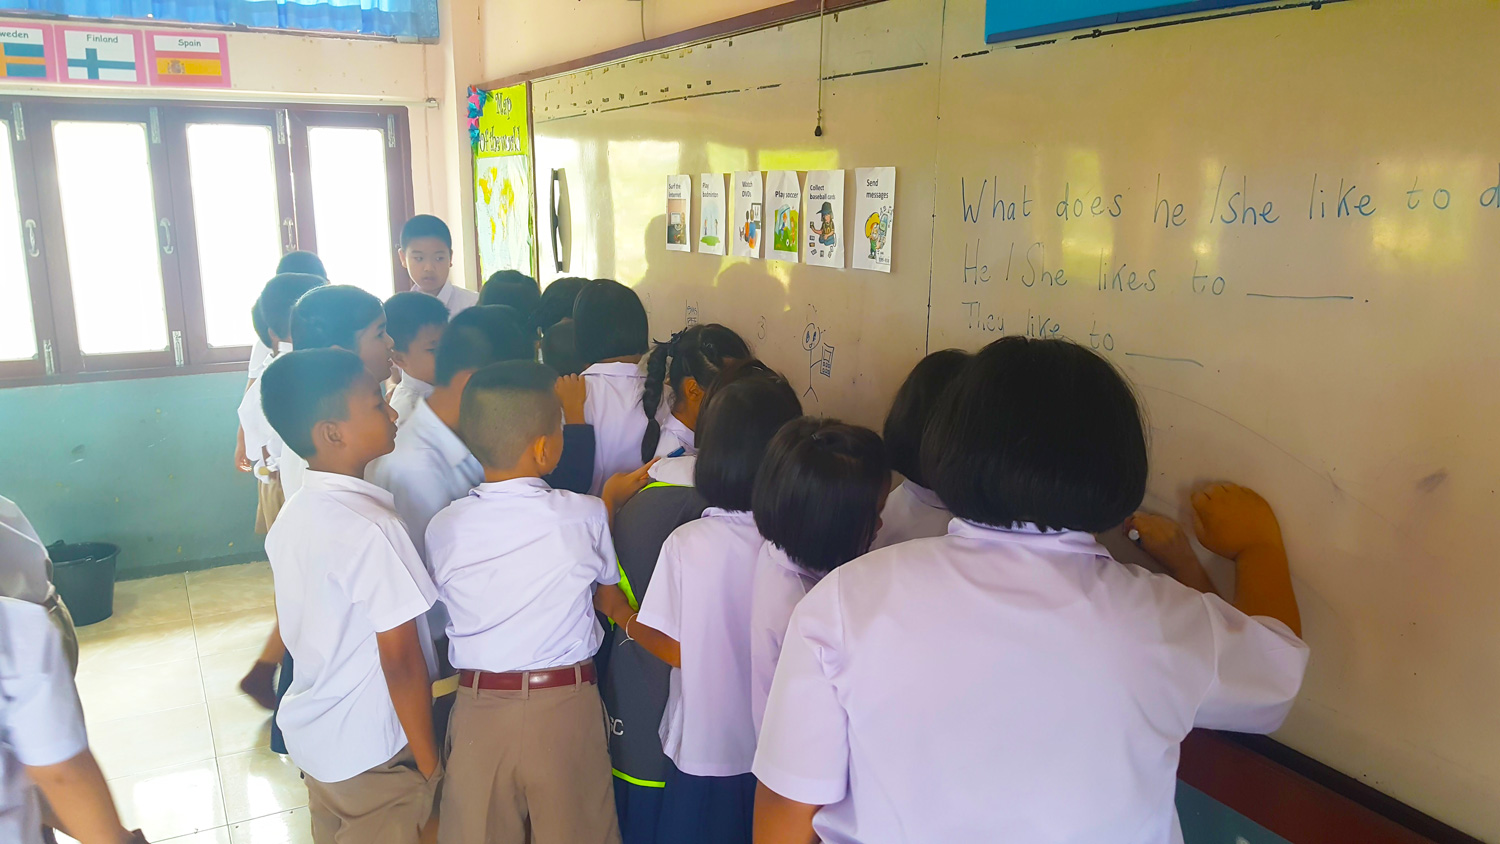 Students writing on whiteboard